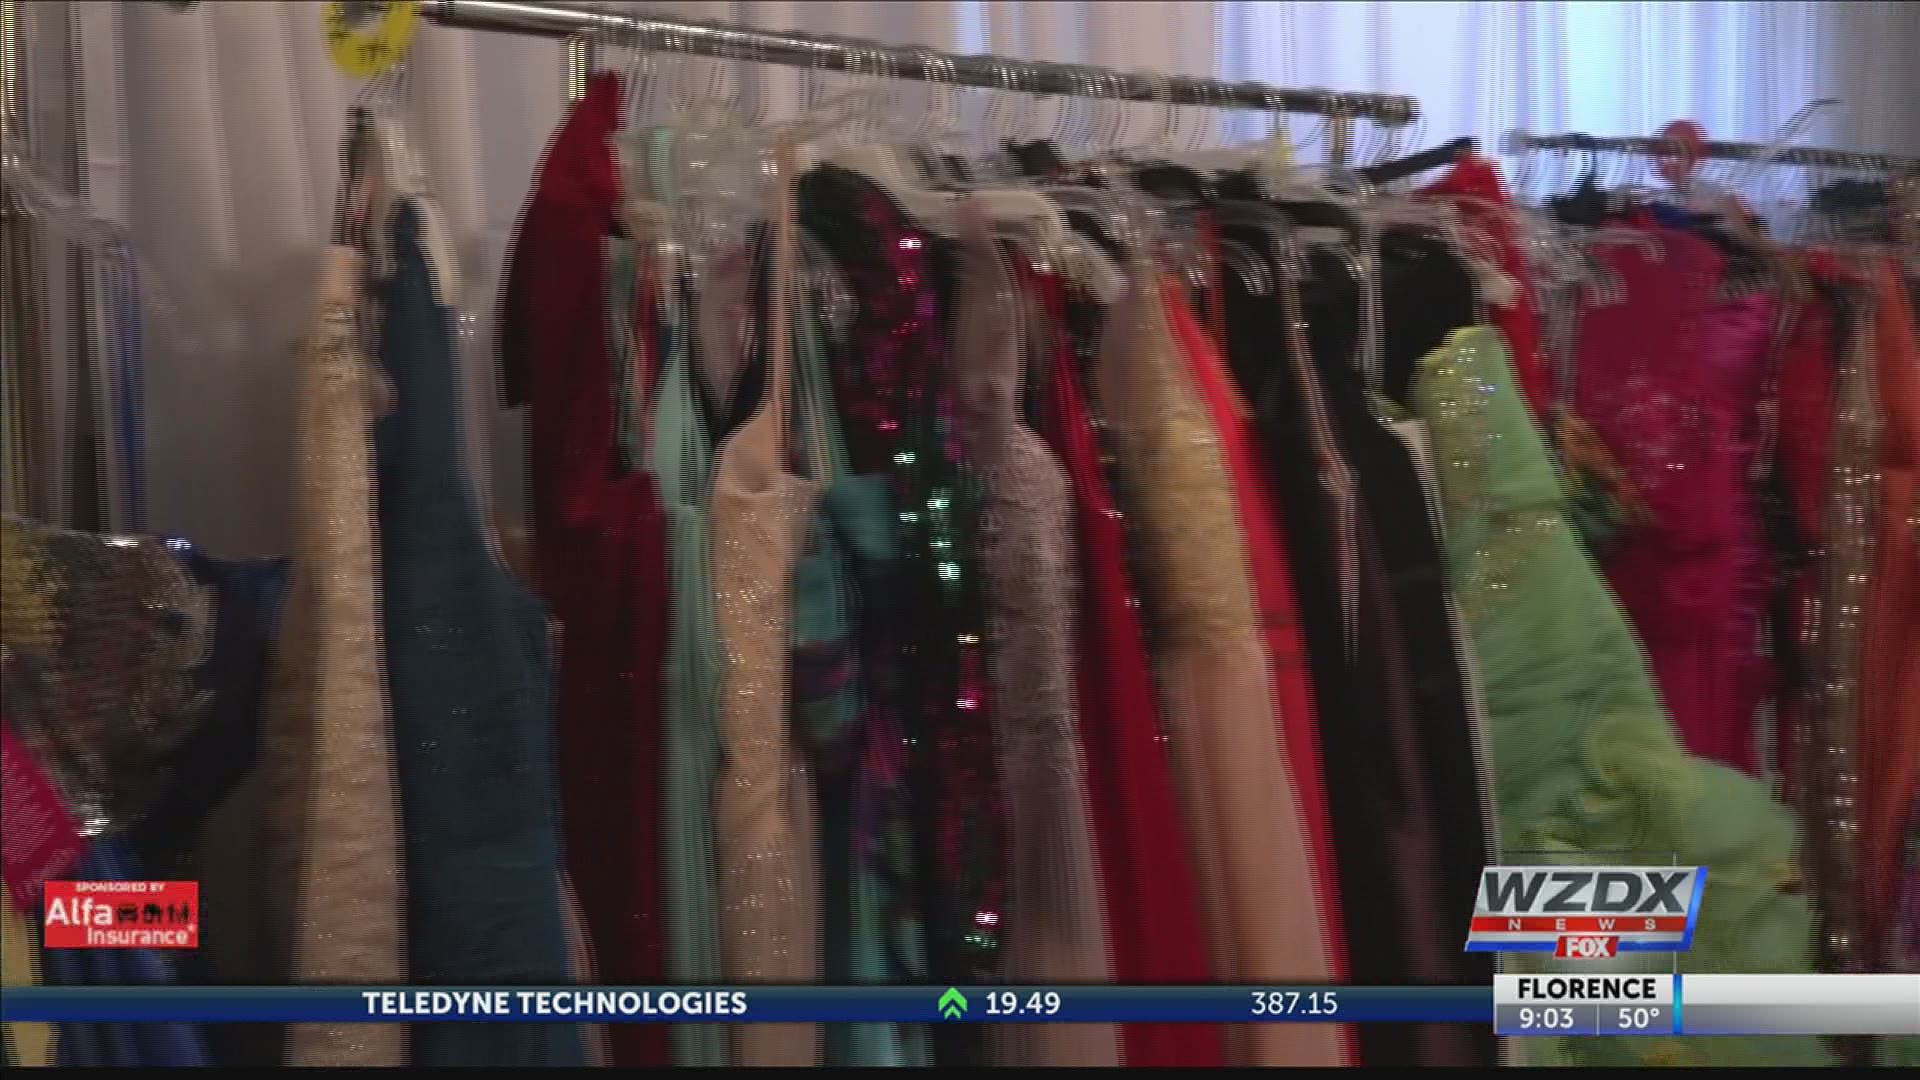 Prom goers on the Tennessee Valley had the chance to pick out their dream dress...for free.